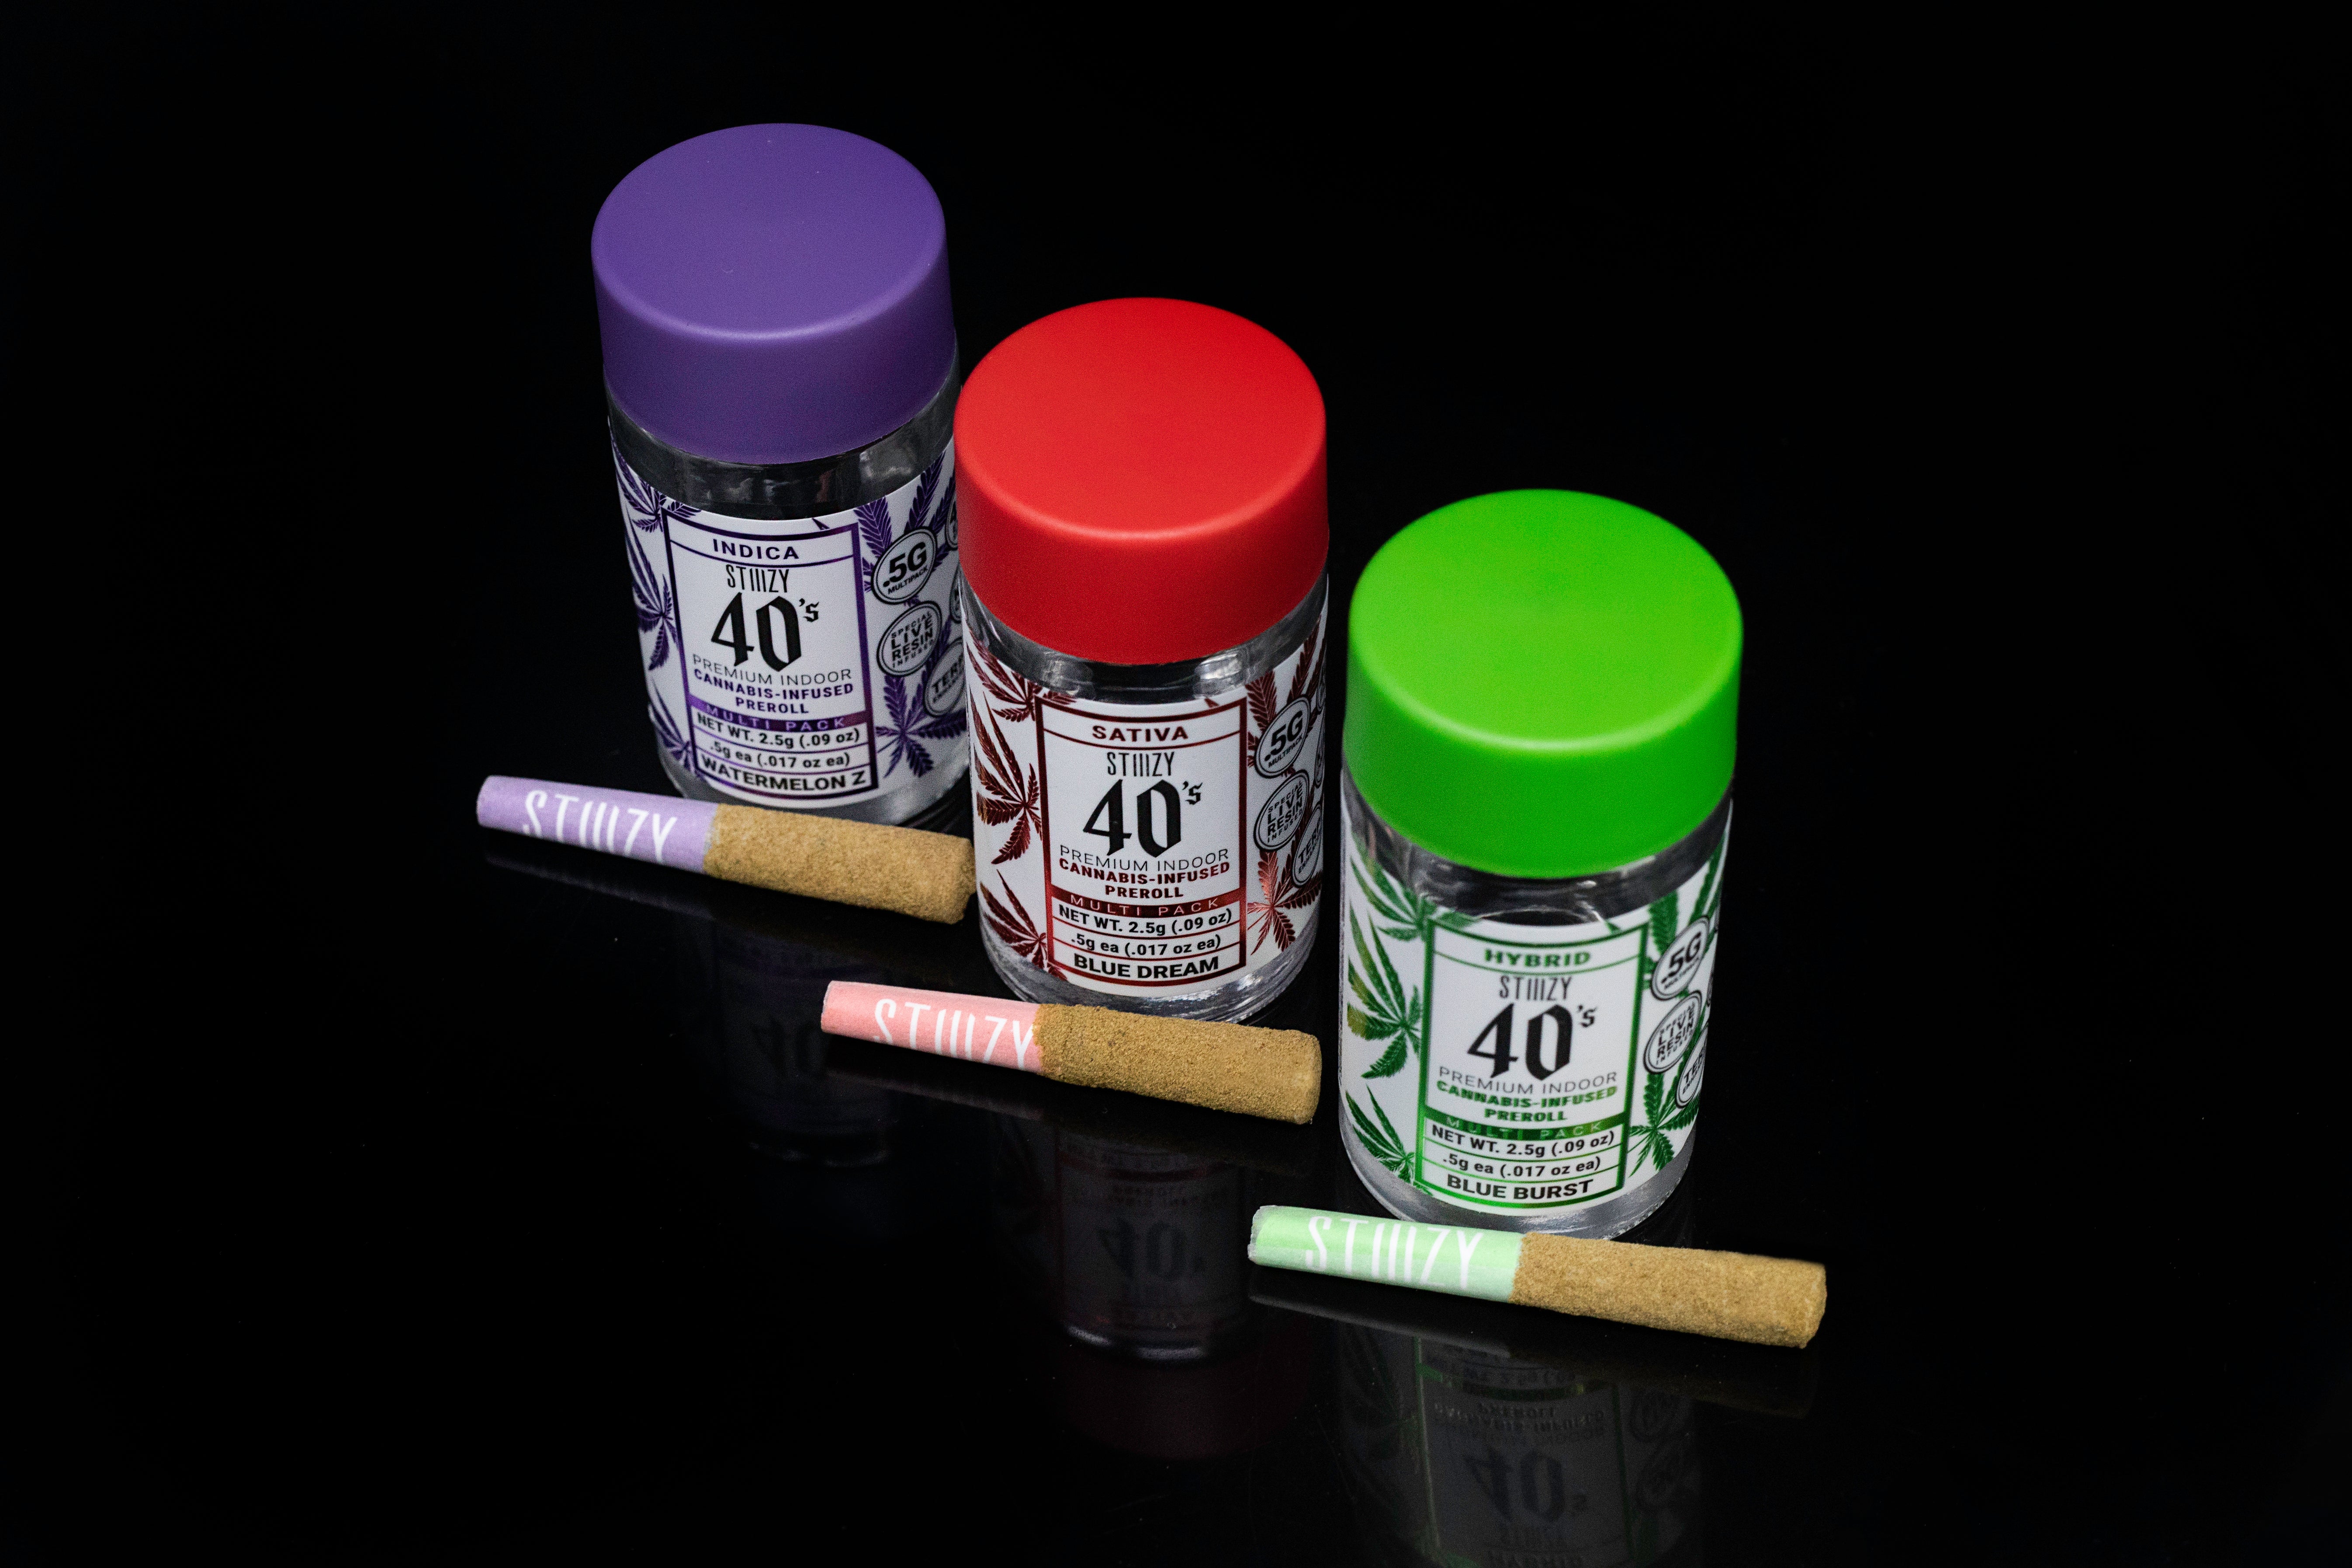 Three infused pre-rolls made with indica, sativa, and hybrid cannabis flower, lay in front of their jars.